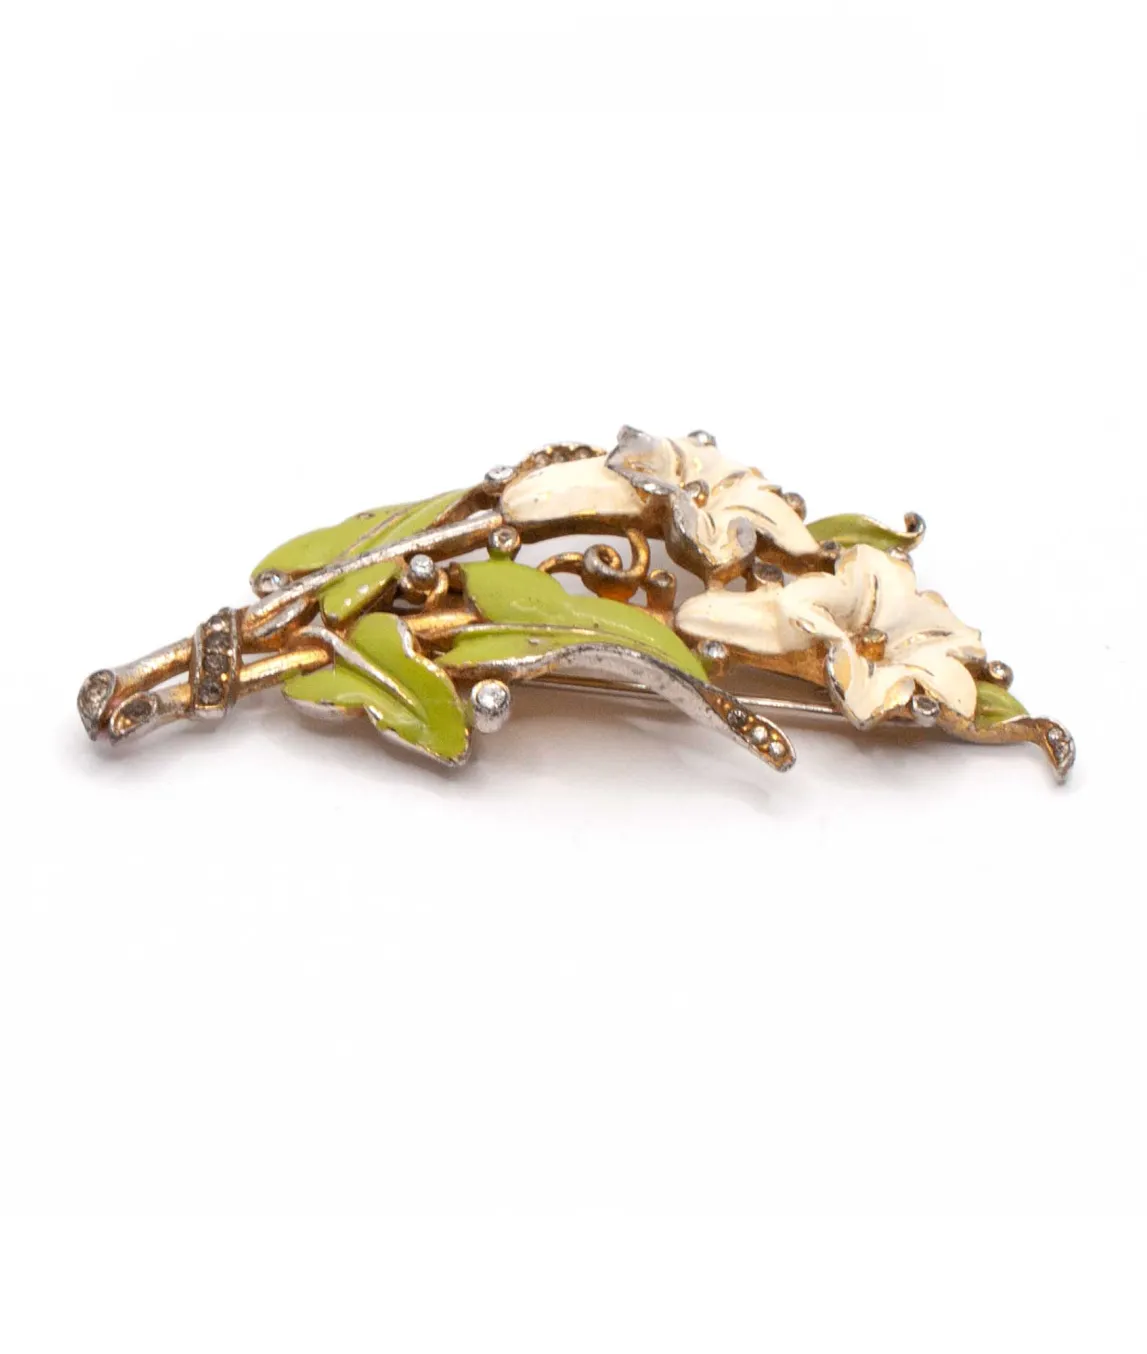 Trifari enamel brooch with green leaves and two ivory flowers side view